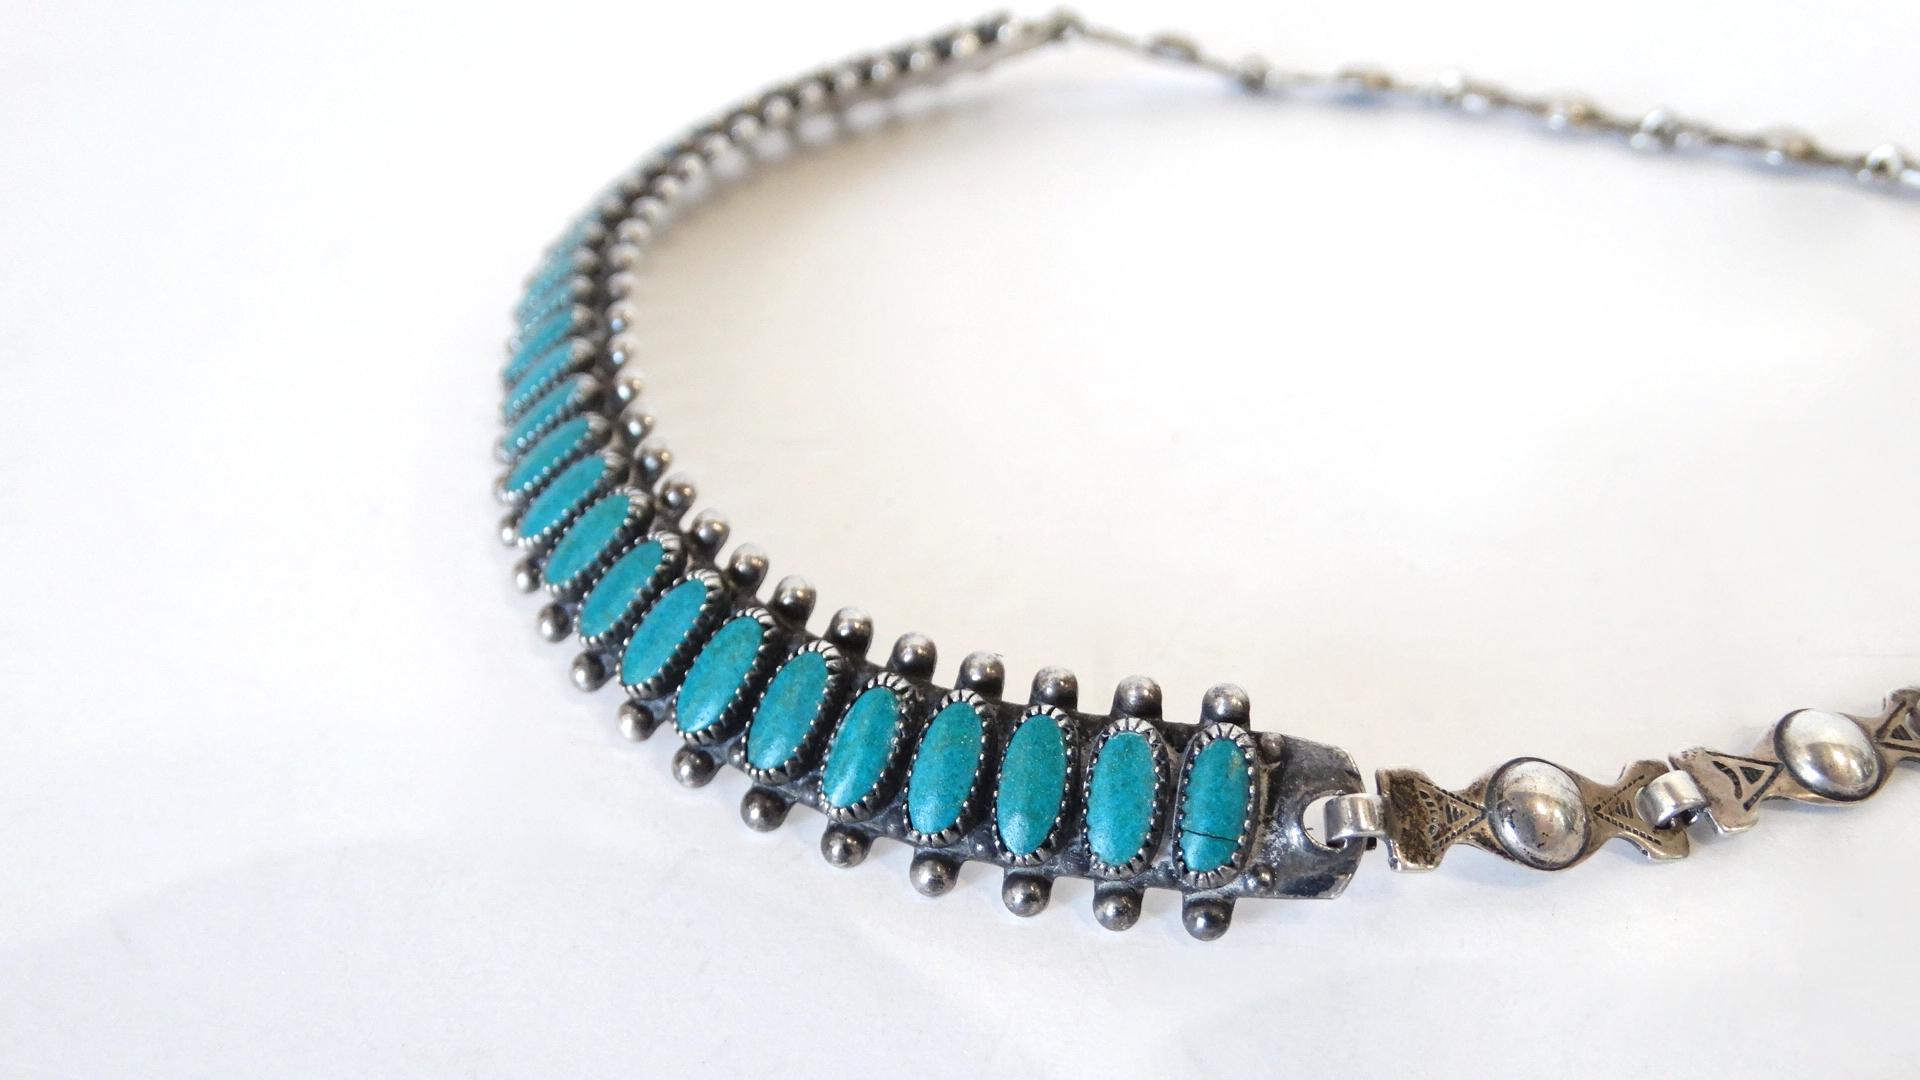 The Most Beautiful And Timeless Choker Is Here! Circa mid to late-20th century, this quality sterling silver Native American choker is inlayed with needle point cut Hubble glass stones. Small silver beads line the bottom and top trim of the